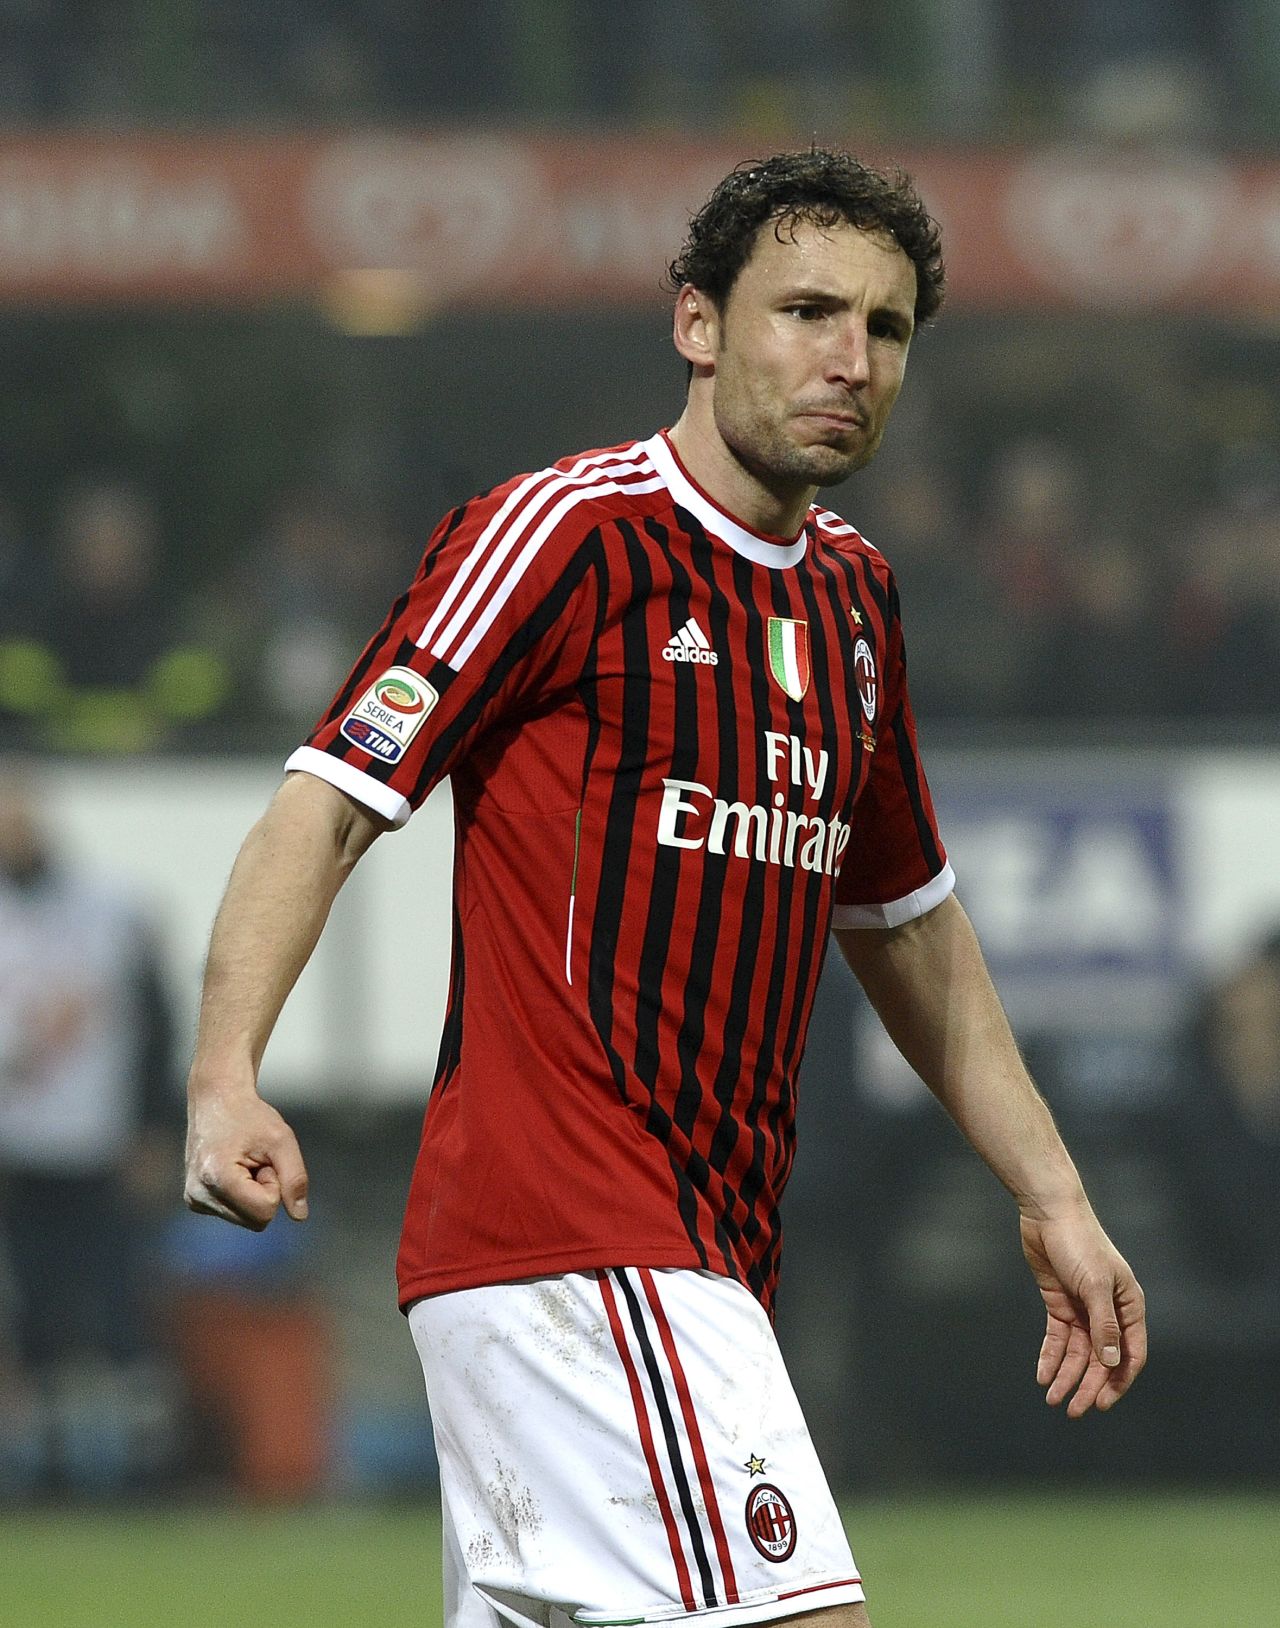 Although football clubs paid huge sums to purchase superstars last year, 70% of all international transfers in 2011 were of players who were out of contract. One such example is Dutch midfielder Mark van Bommel (pictured), who moved from Bayern Munich to AC Milan after his contract was terminated.